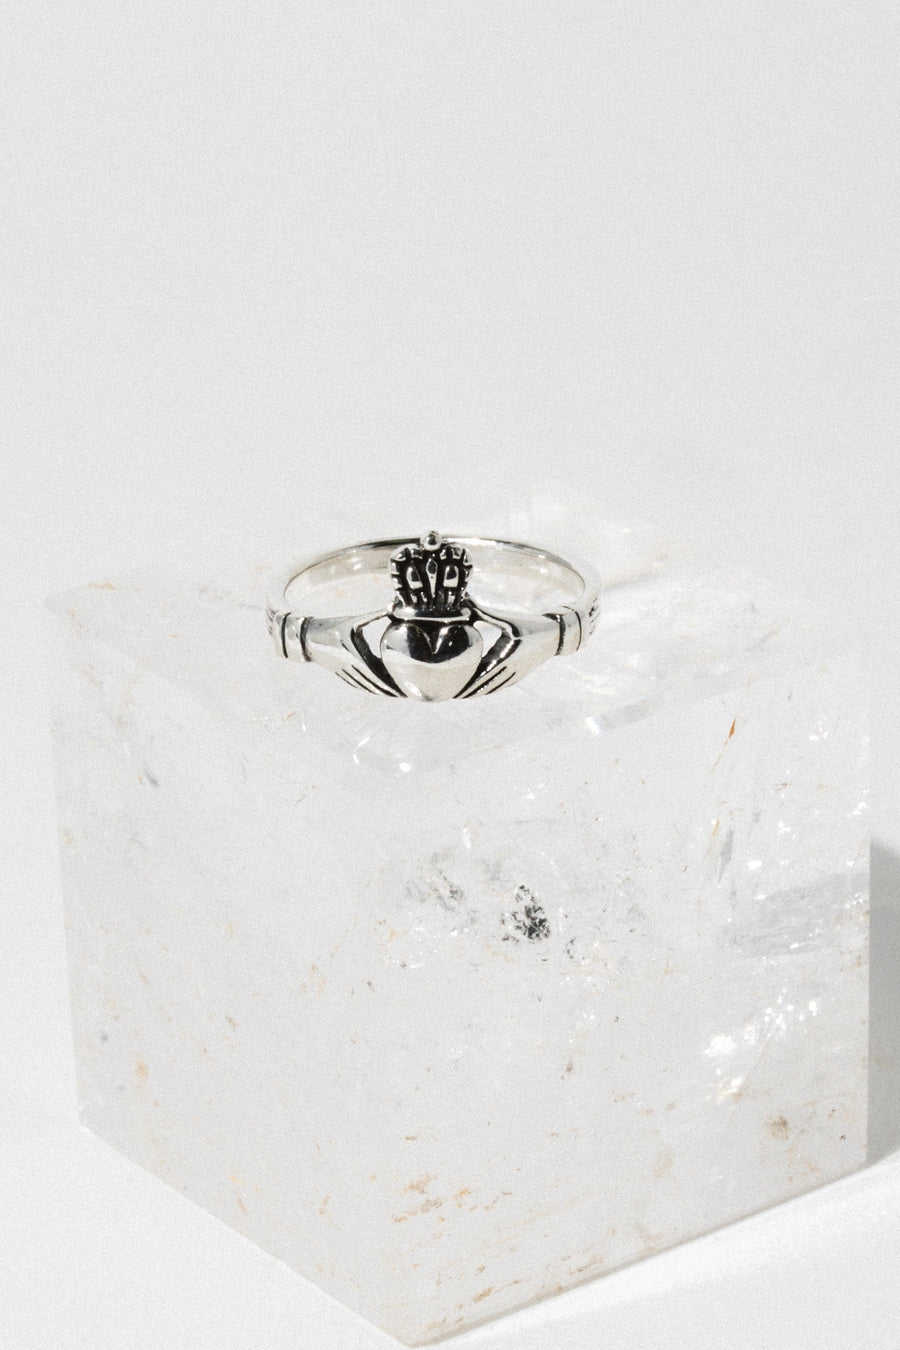 The Wellman Group Jewelry Claddagh Ring